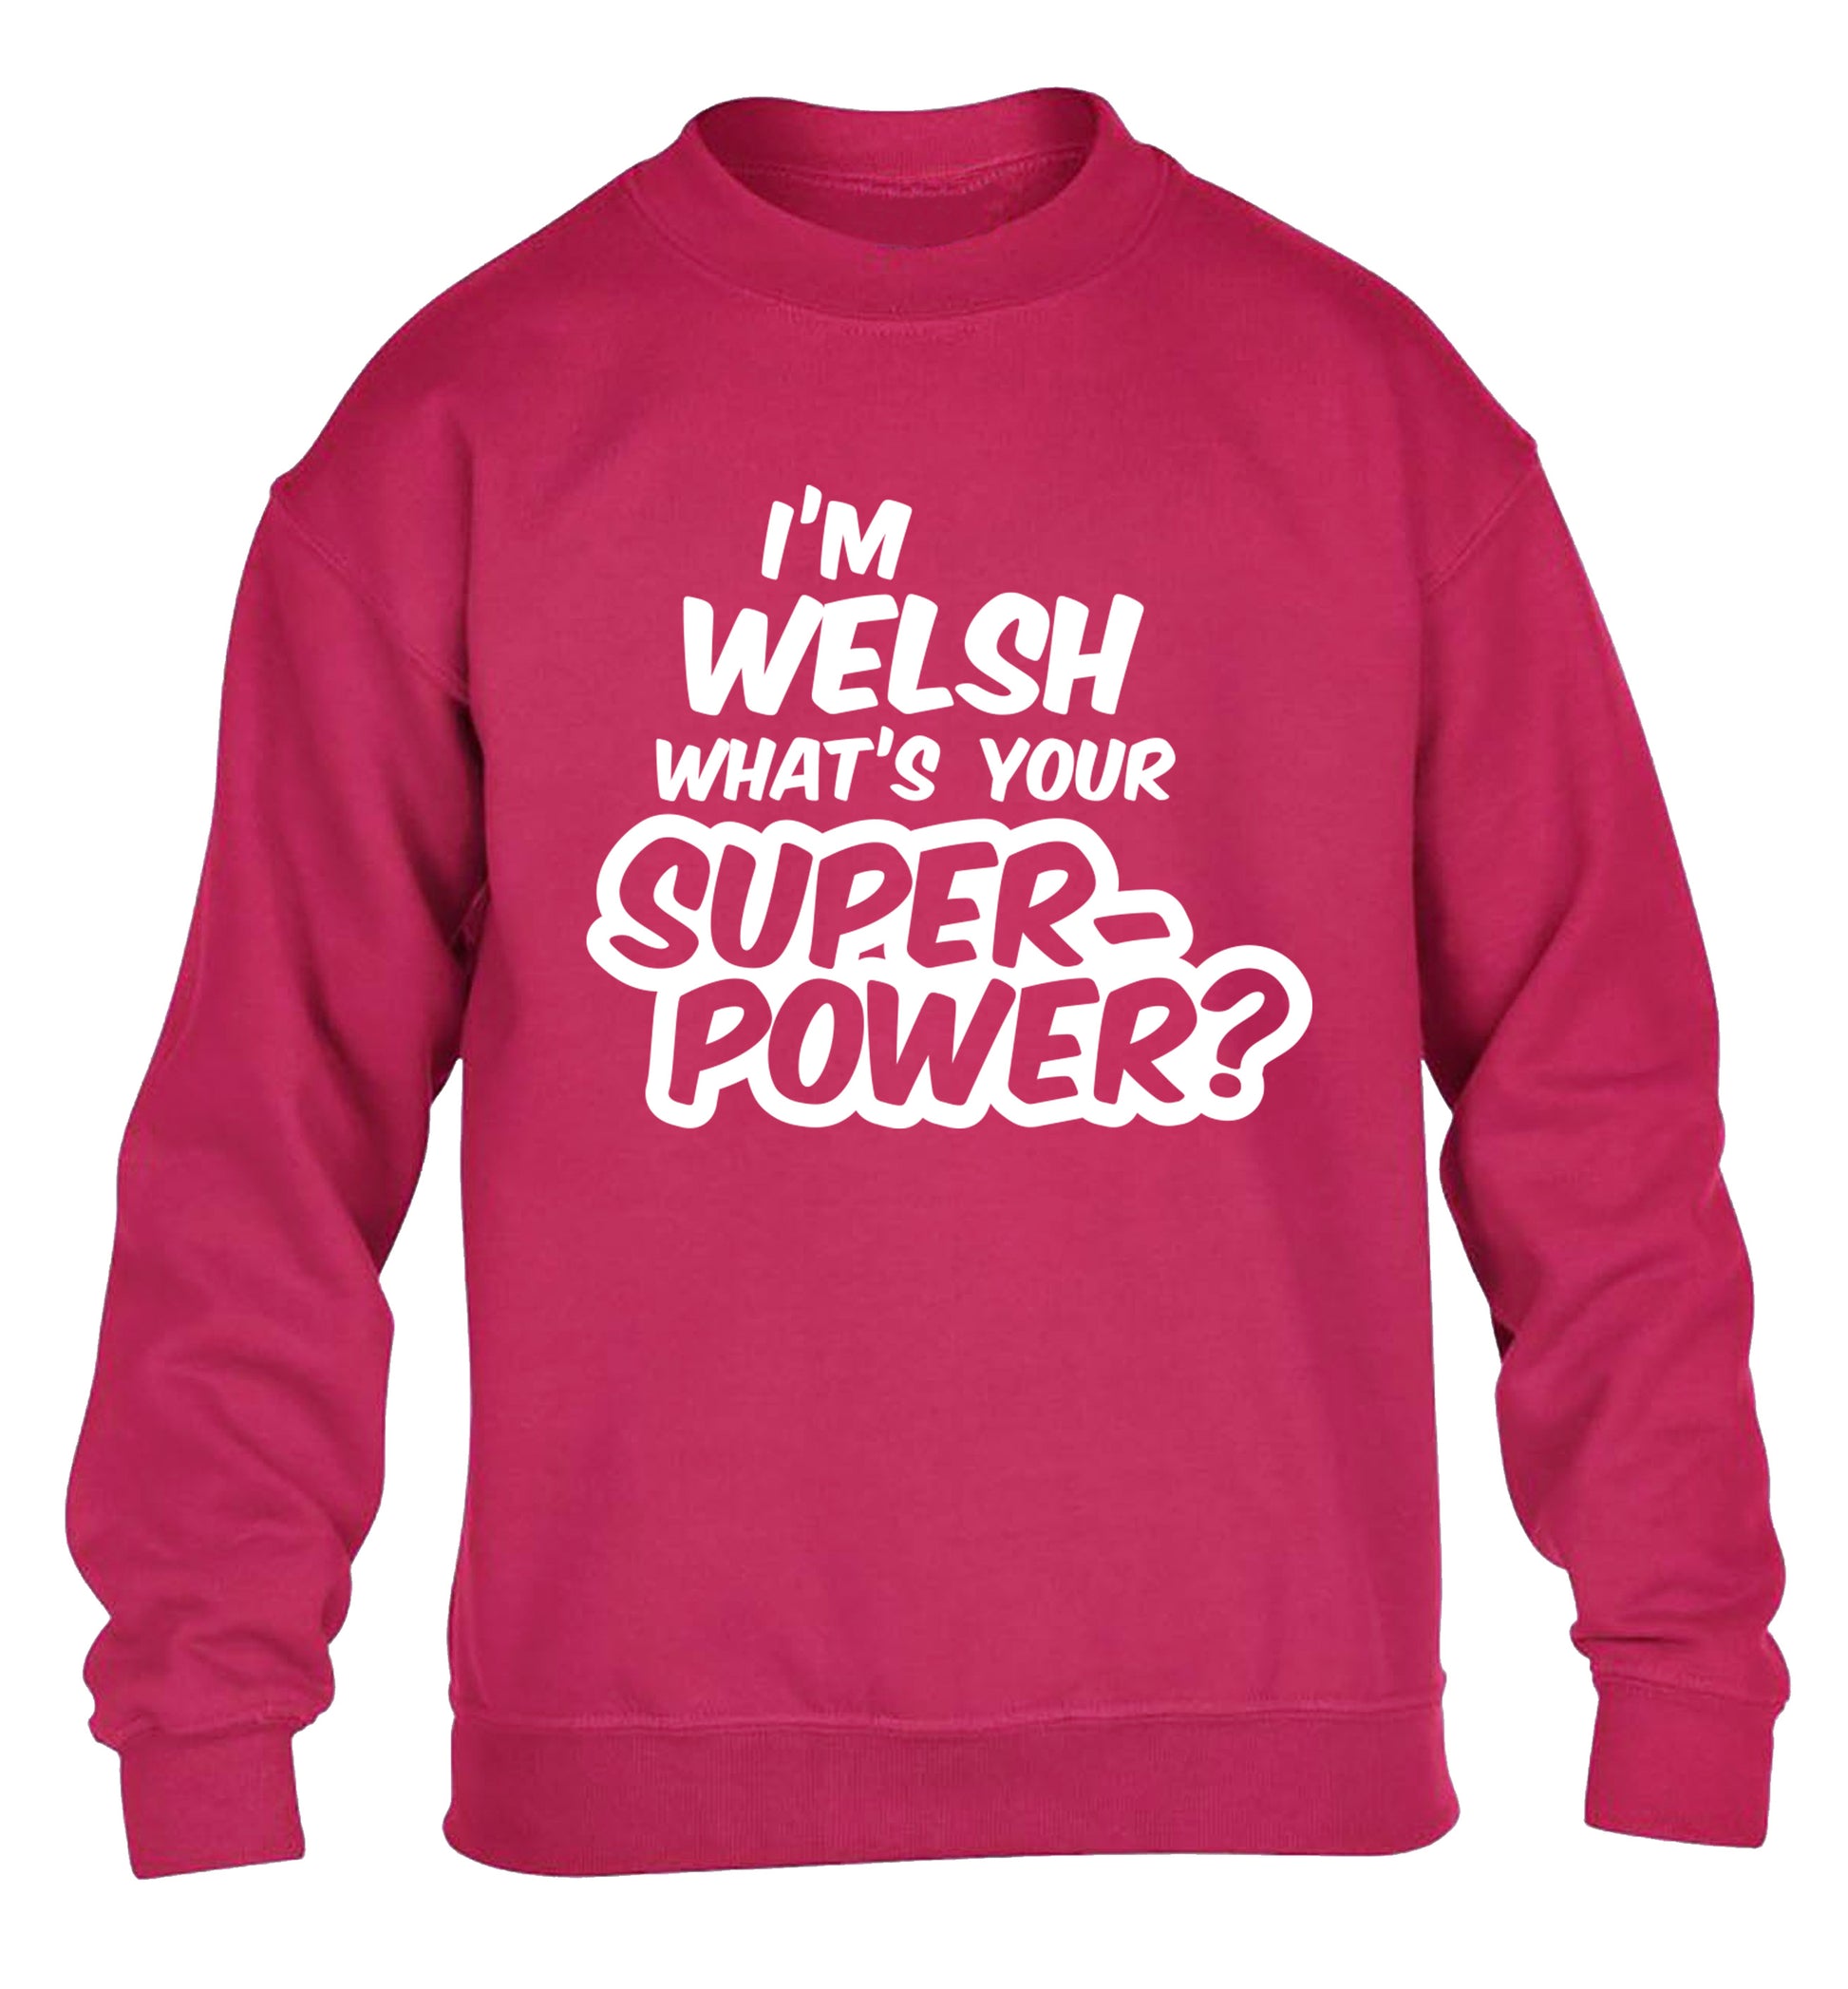 I'm Welsh what's your superpower? children's pink sweater 12-13 Years